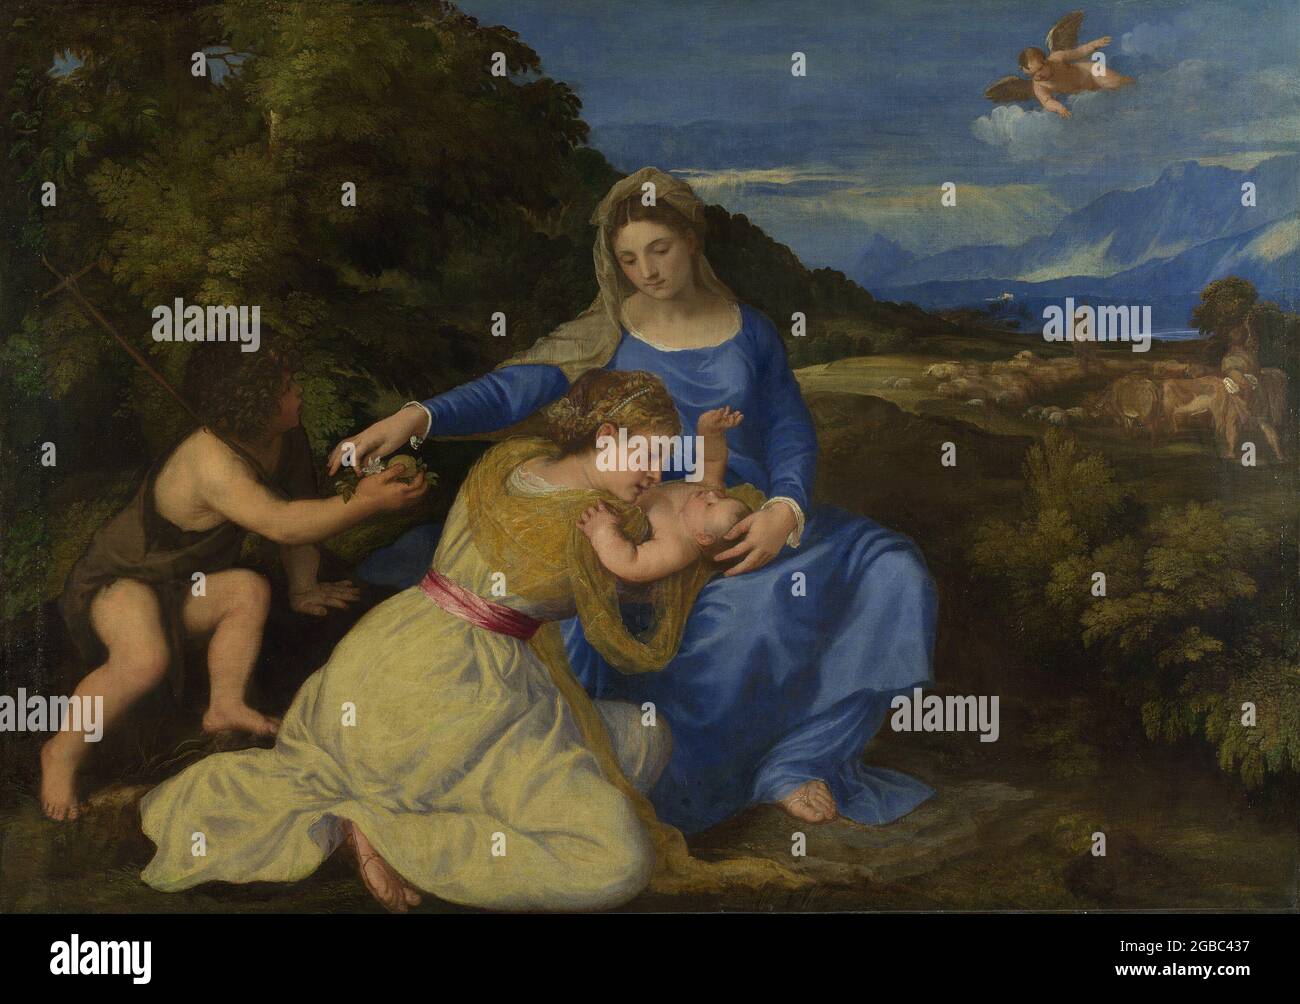 Title: The Virgin and Child with the Infant Saint John and a Female Saint or Donor ('The Aldobrandini Madonna') Creator: Titian - Tiziano Vecellio  Date: c. 1532 Medium: oil on canvas Dimensions: 100.6 x 142.2 cm Location: The National Gallery, London Stock Photo